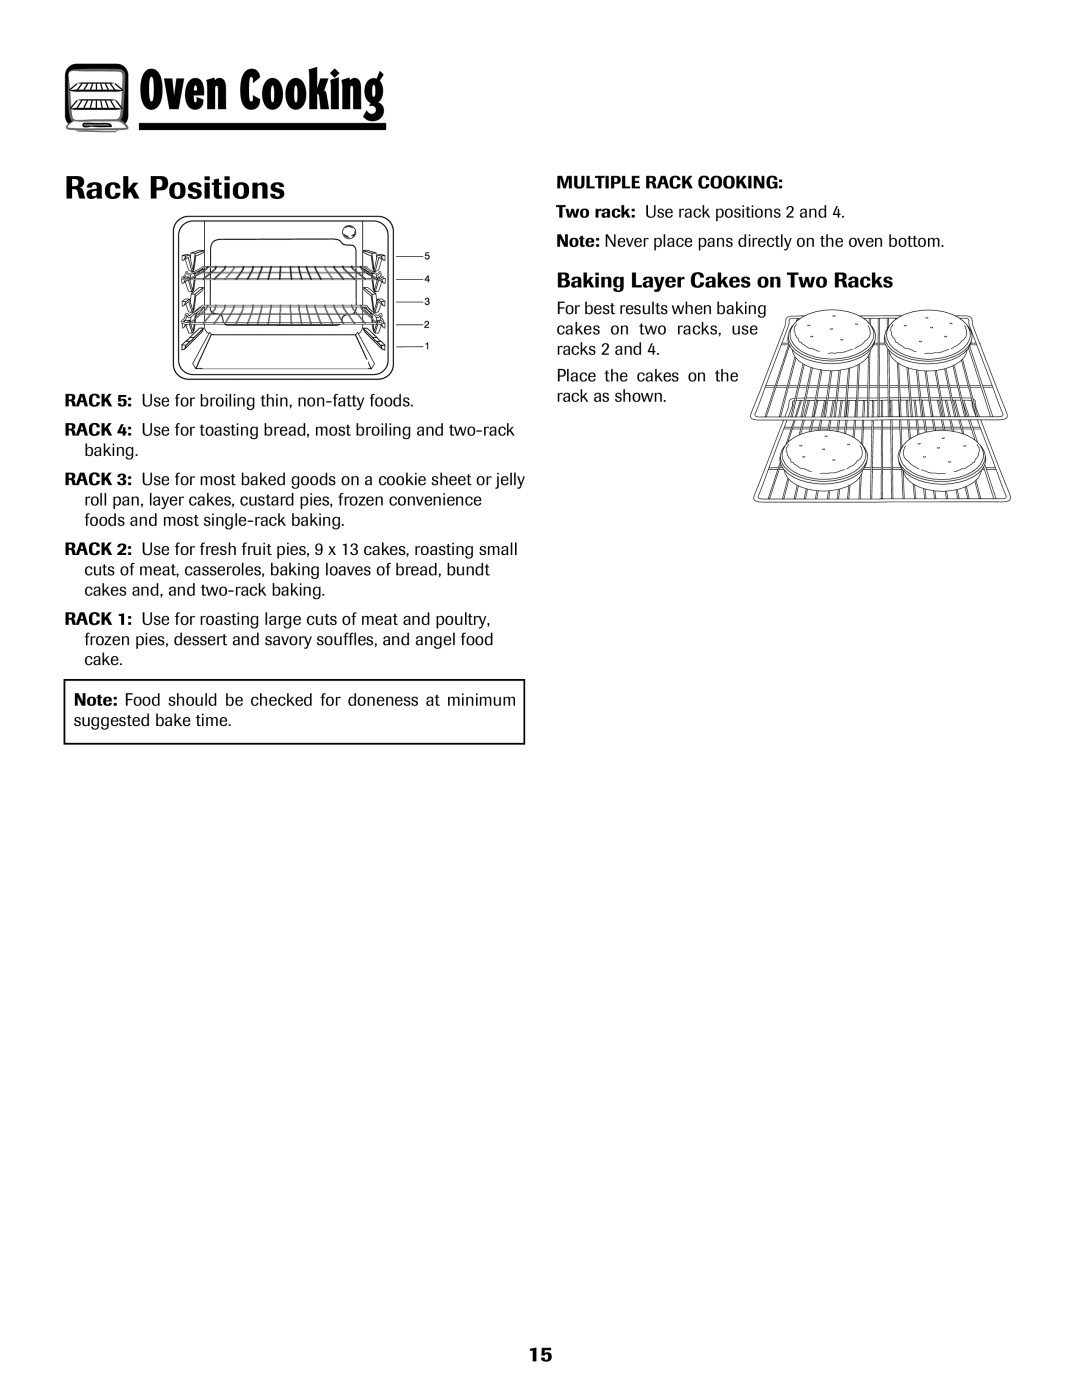 Amana 500 manual Rack Positions, Baking Layer Cakes on Two Racks, Oven Cooking 